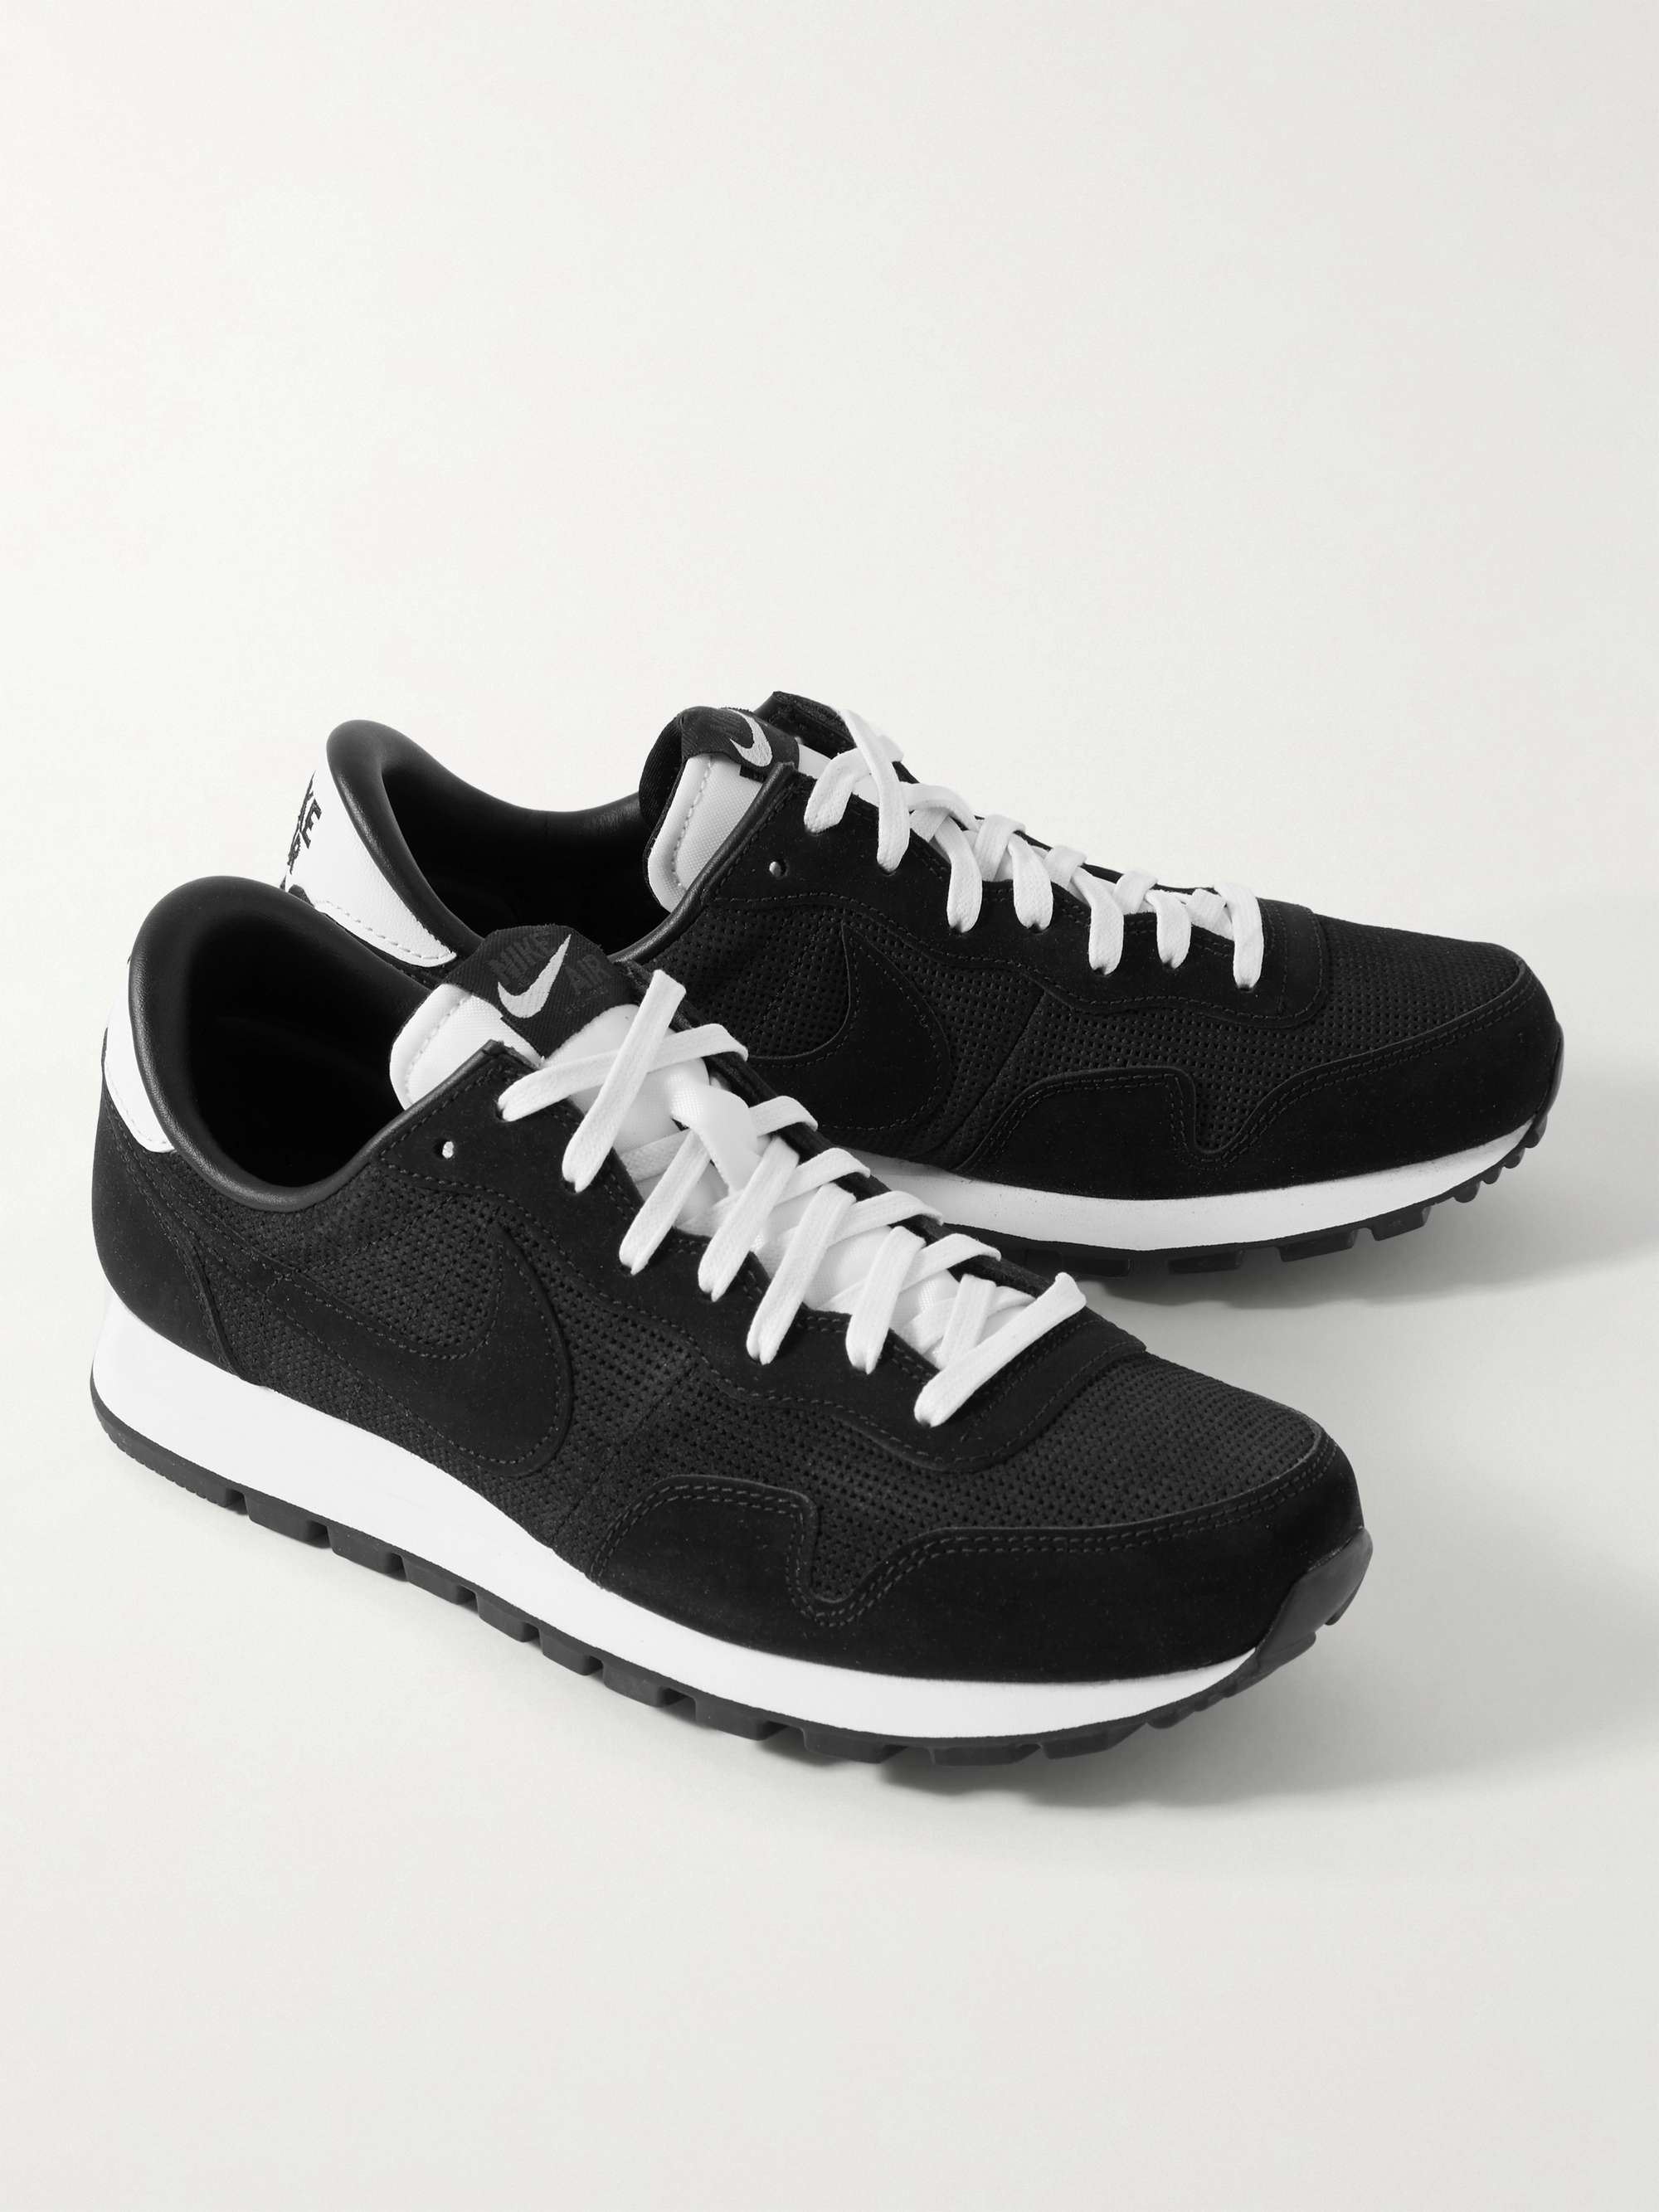 NIKE Air Pegasus 83 Leather-Trimmed Perforated Suede Sneakers